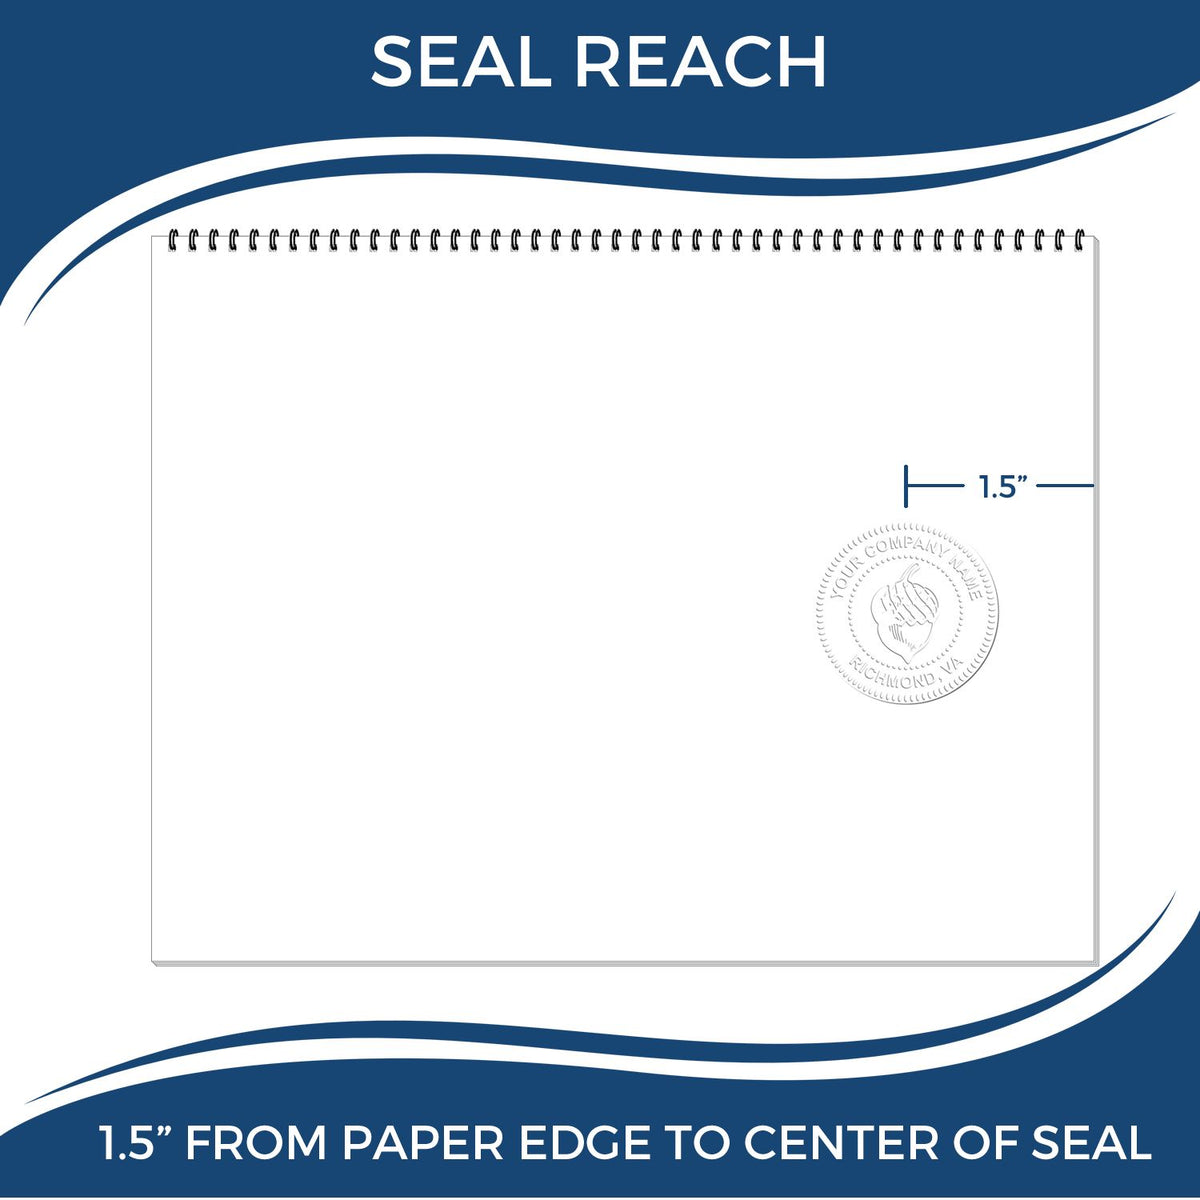 An infographic showing the seal reach which is represented by a ruler and a miniature seal image of the Gift Alaska Landscape Architect Seal